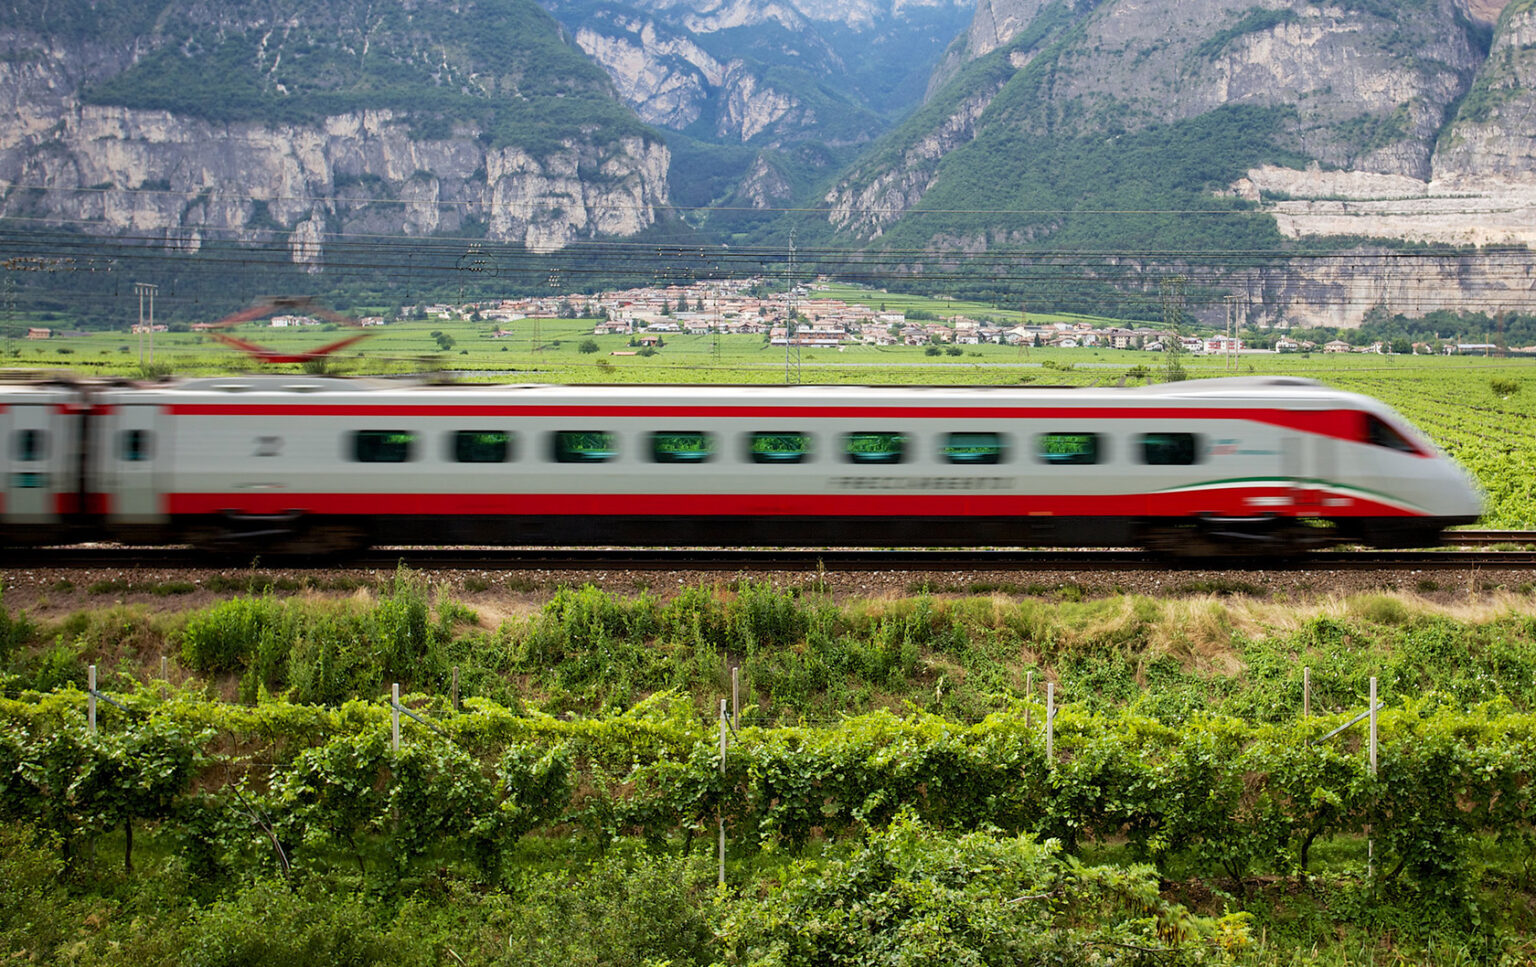 train travel from venice to florence italy